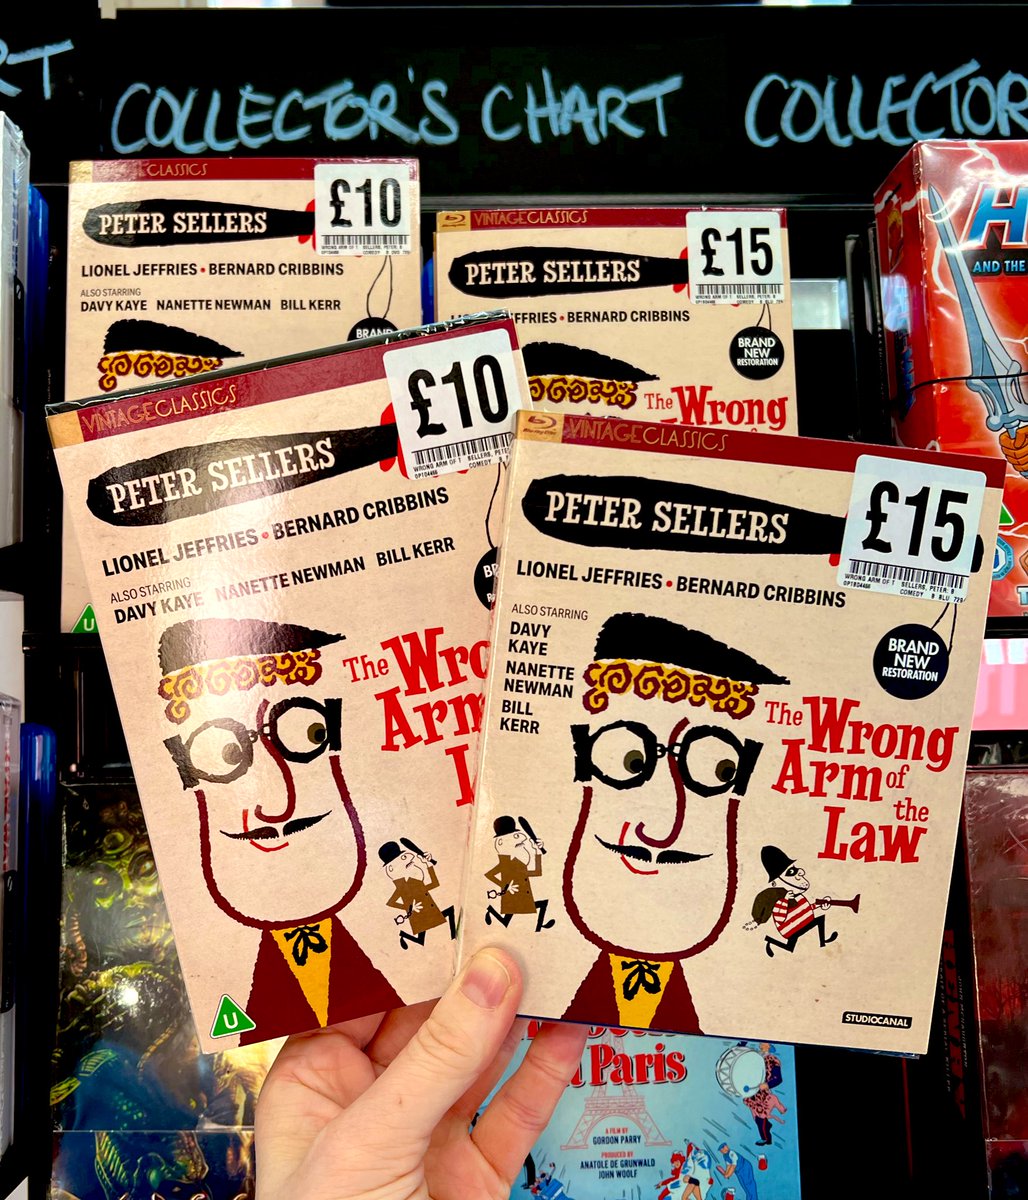 ⚡️NEW THIS WEEK AT FOPP⚡️

Sloshin' a bogey in the execution of 'is duty? Oh dear, dear, dear!

#WrongArmOfTheLaw #PeterSellers 
#FoppCovent #GetToFopp #Fopp